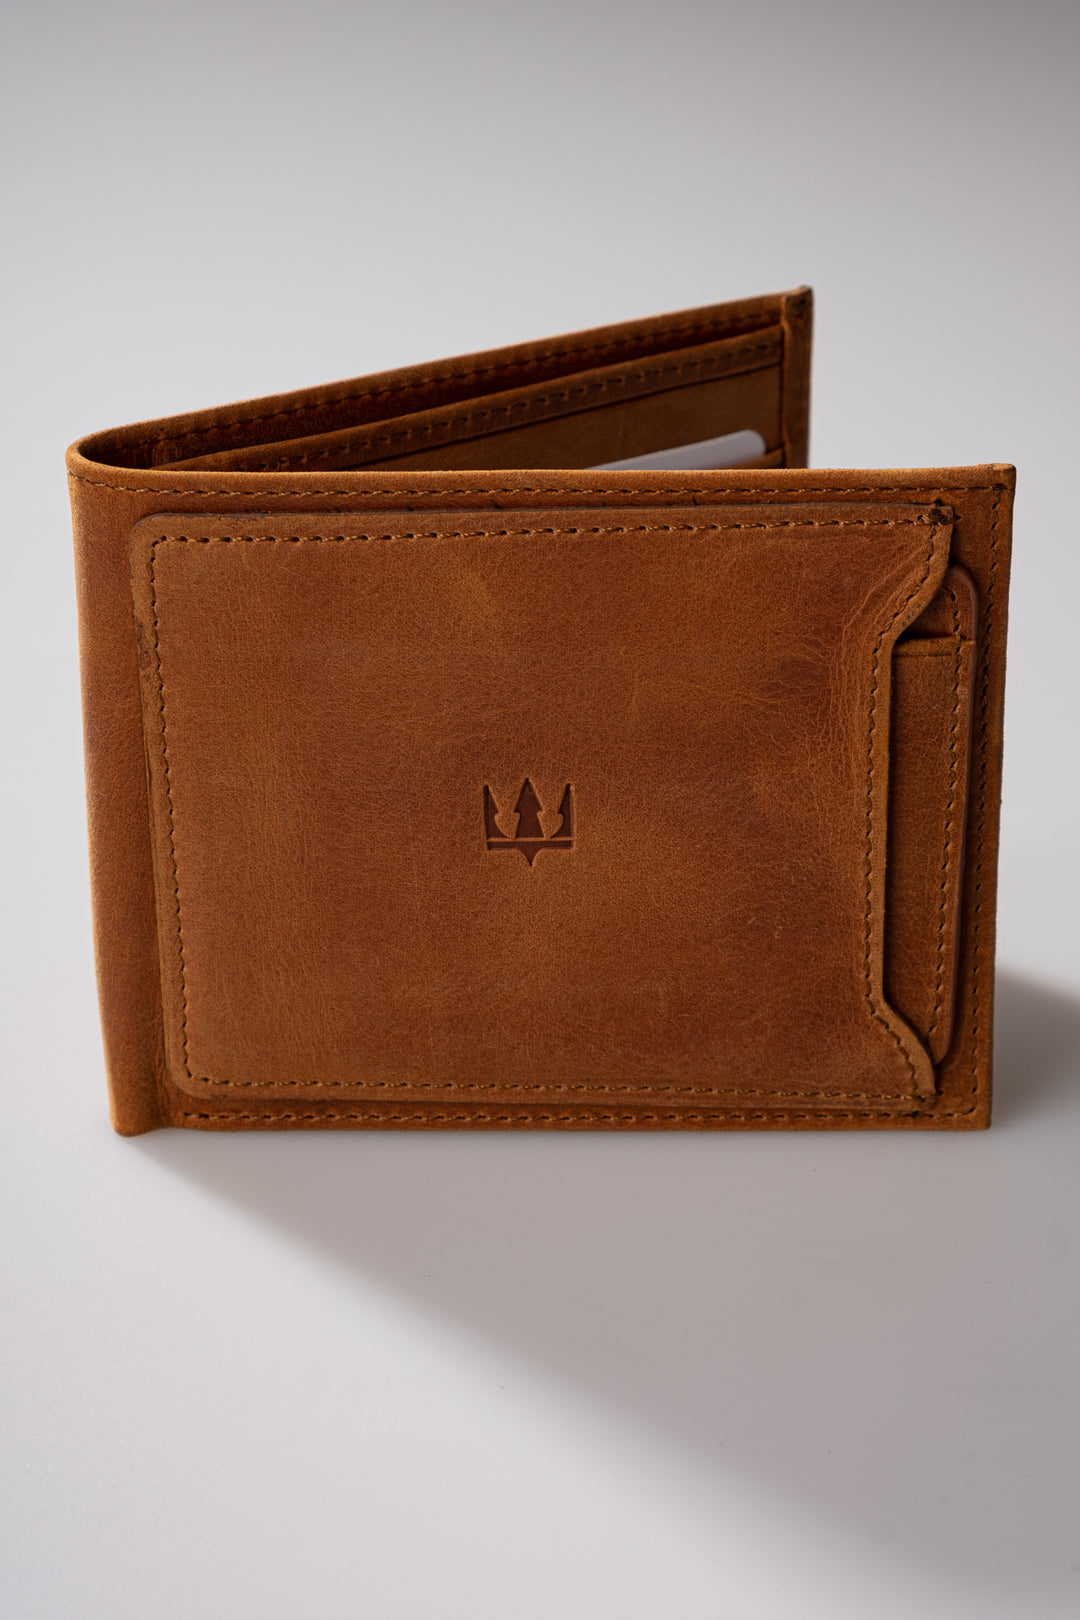 Orange Leather Wallet in Genuine Italian Leather with Olive Chèvre